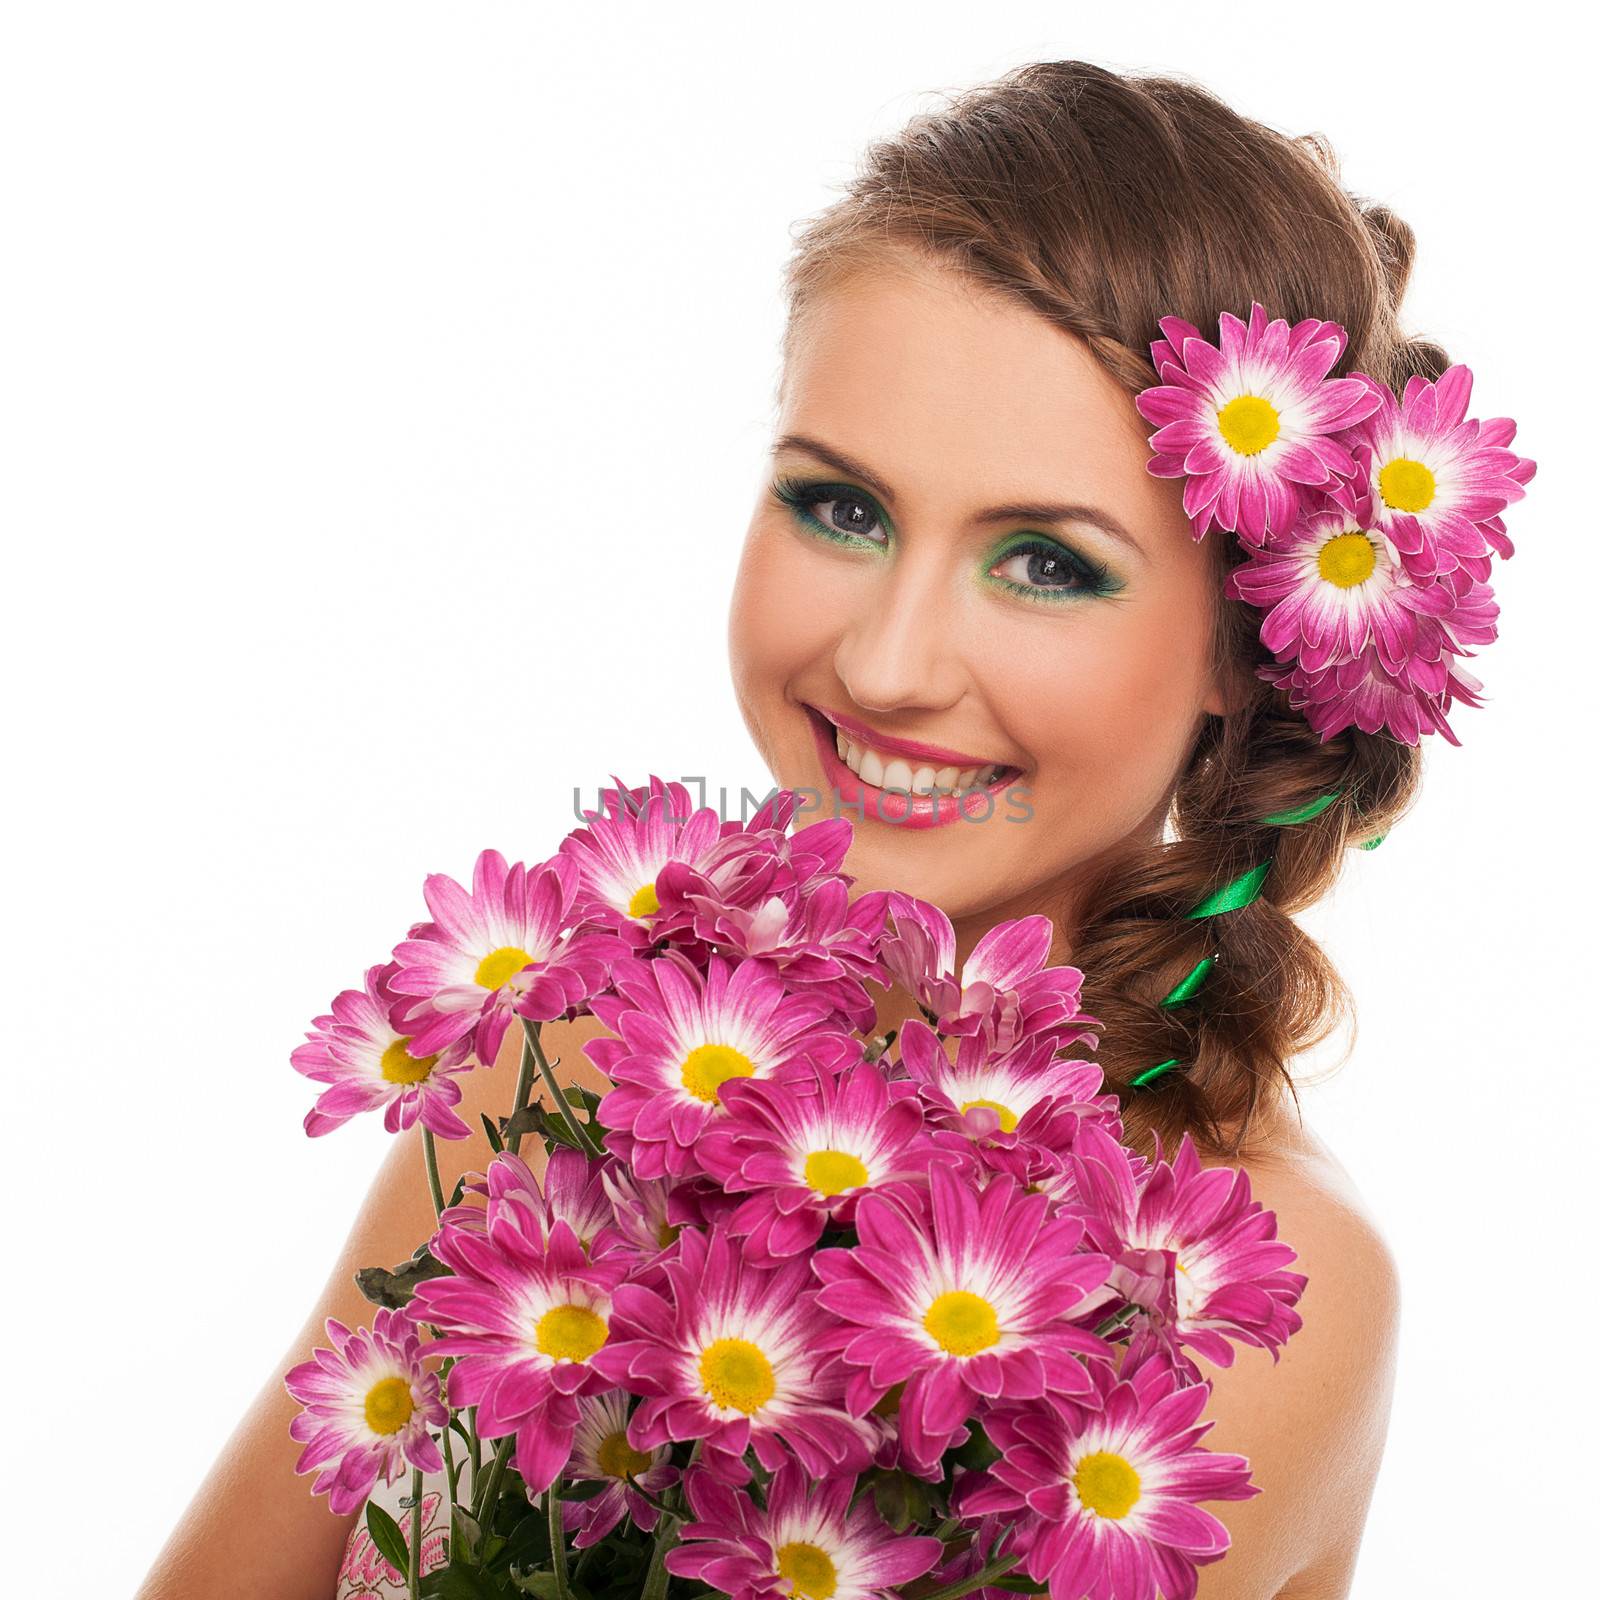 Young beautiful woman with flowers in her hair and expressive makeup